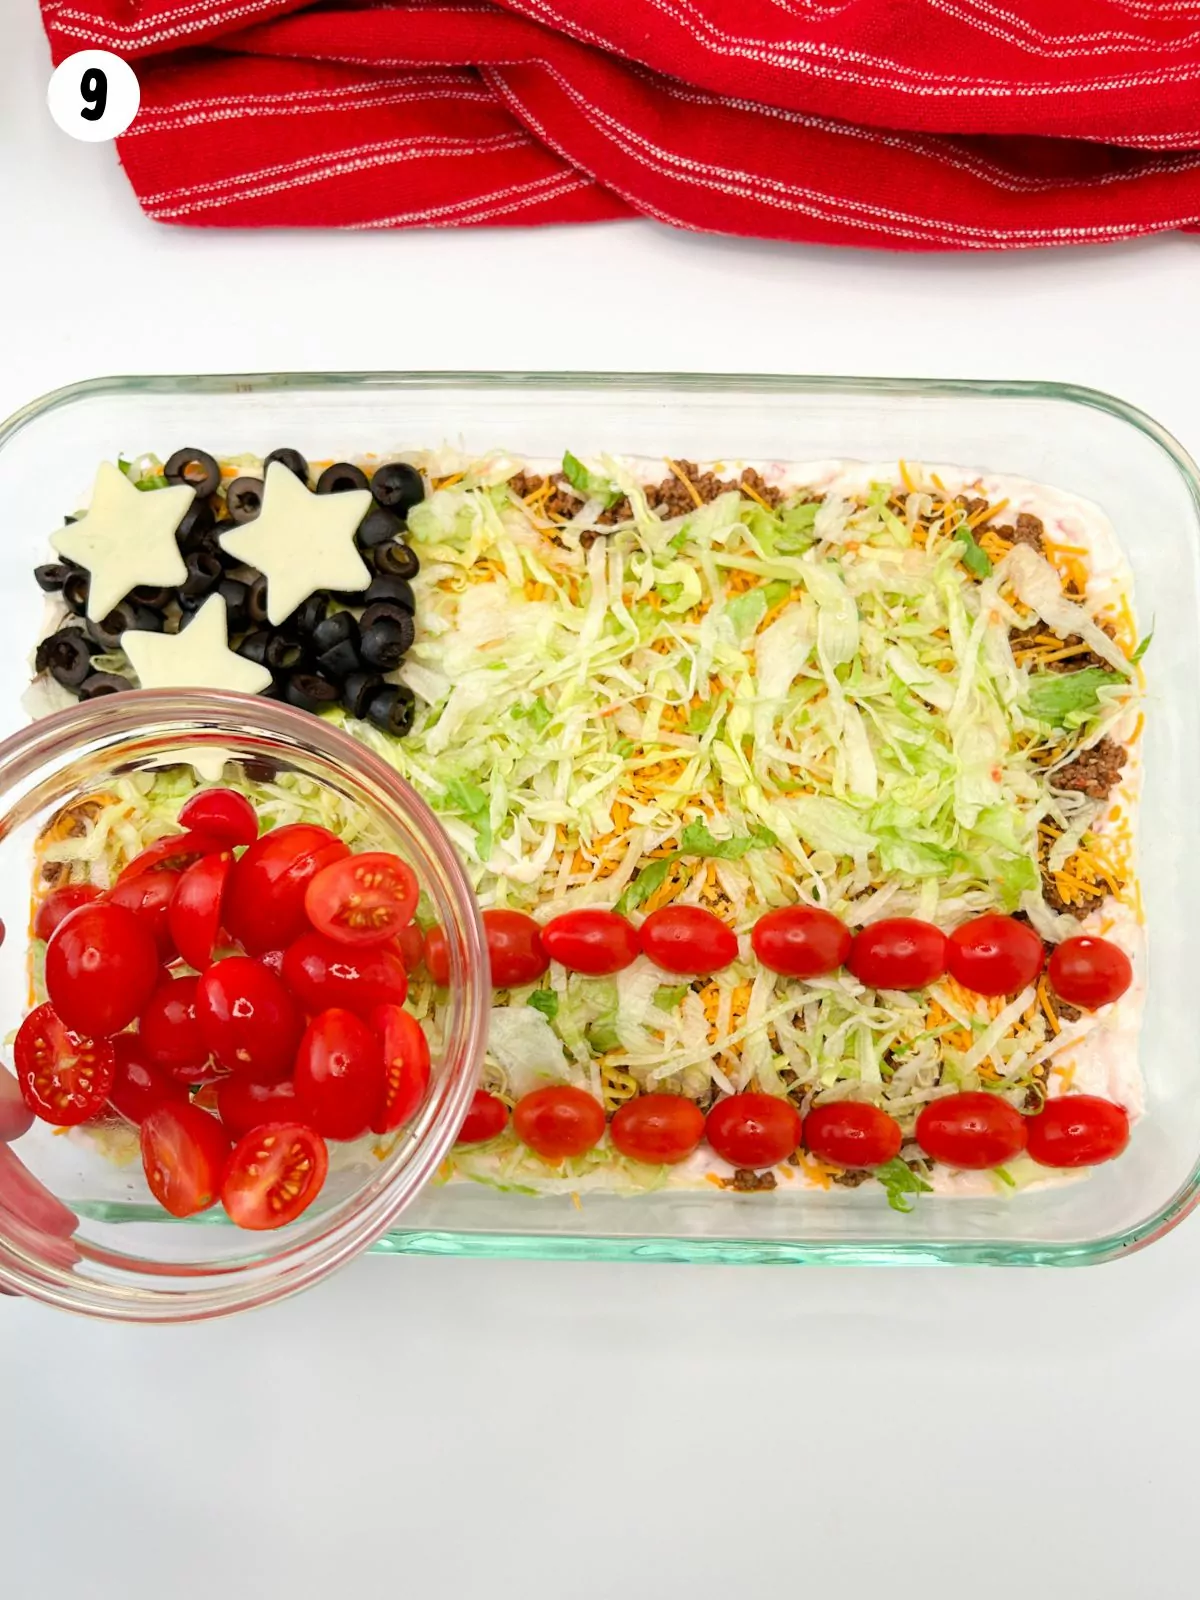 grape tomatoes in small bowl being held over American flag themed taco dip.